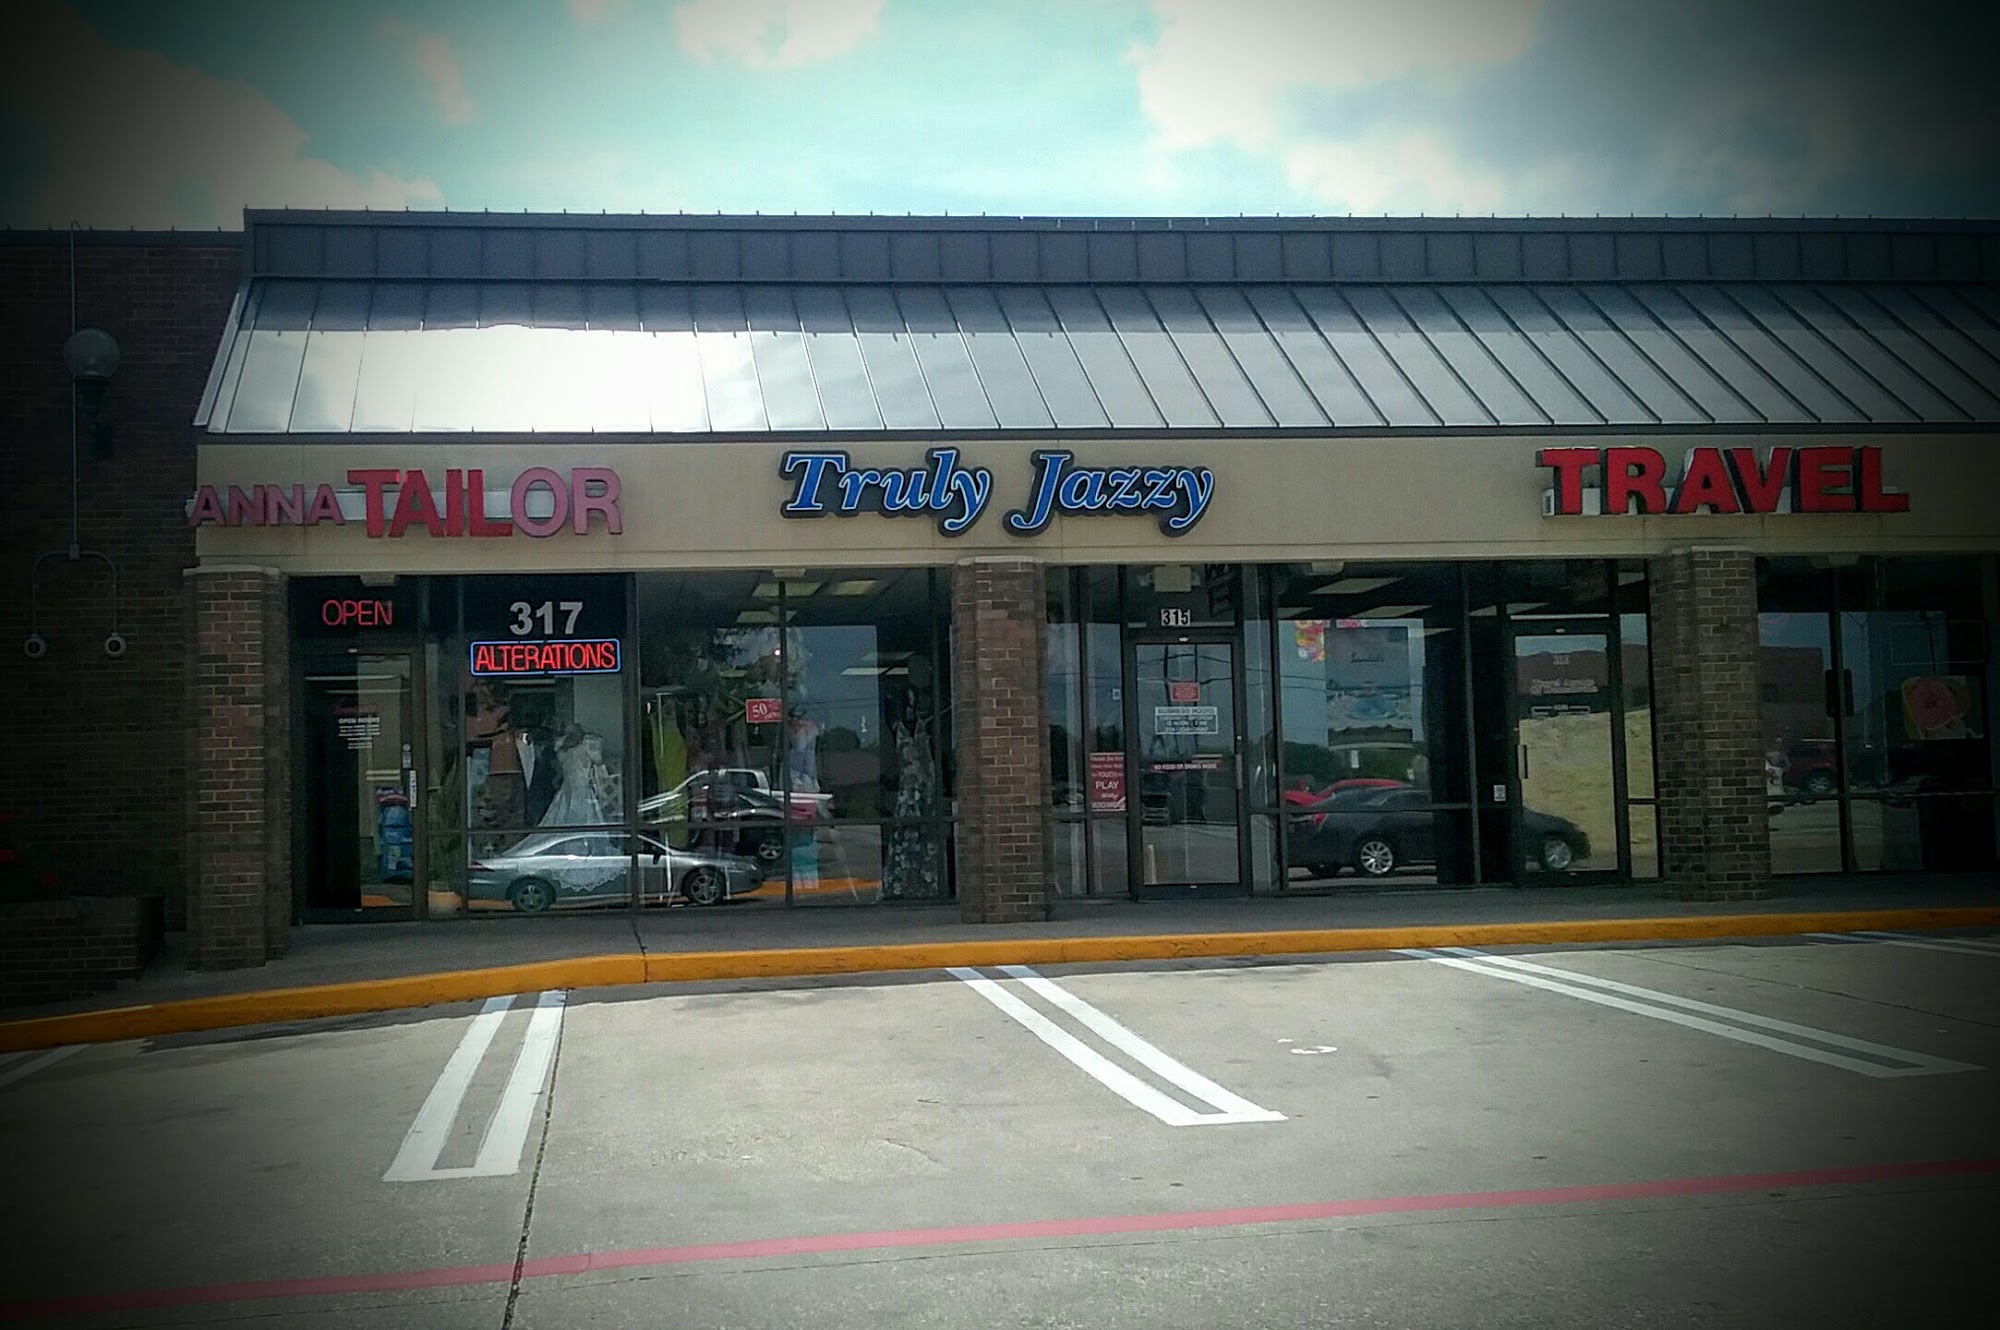 Truly Jazzy Boutique